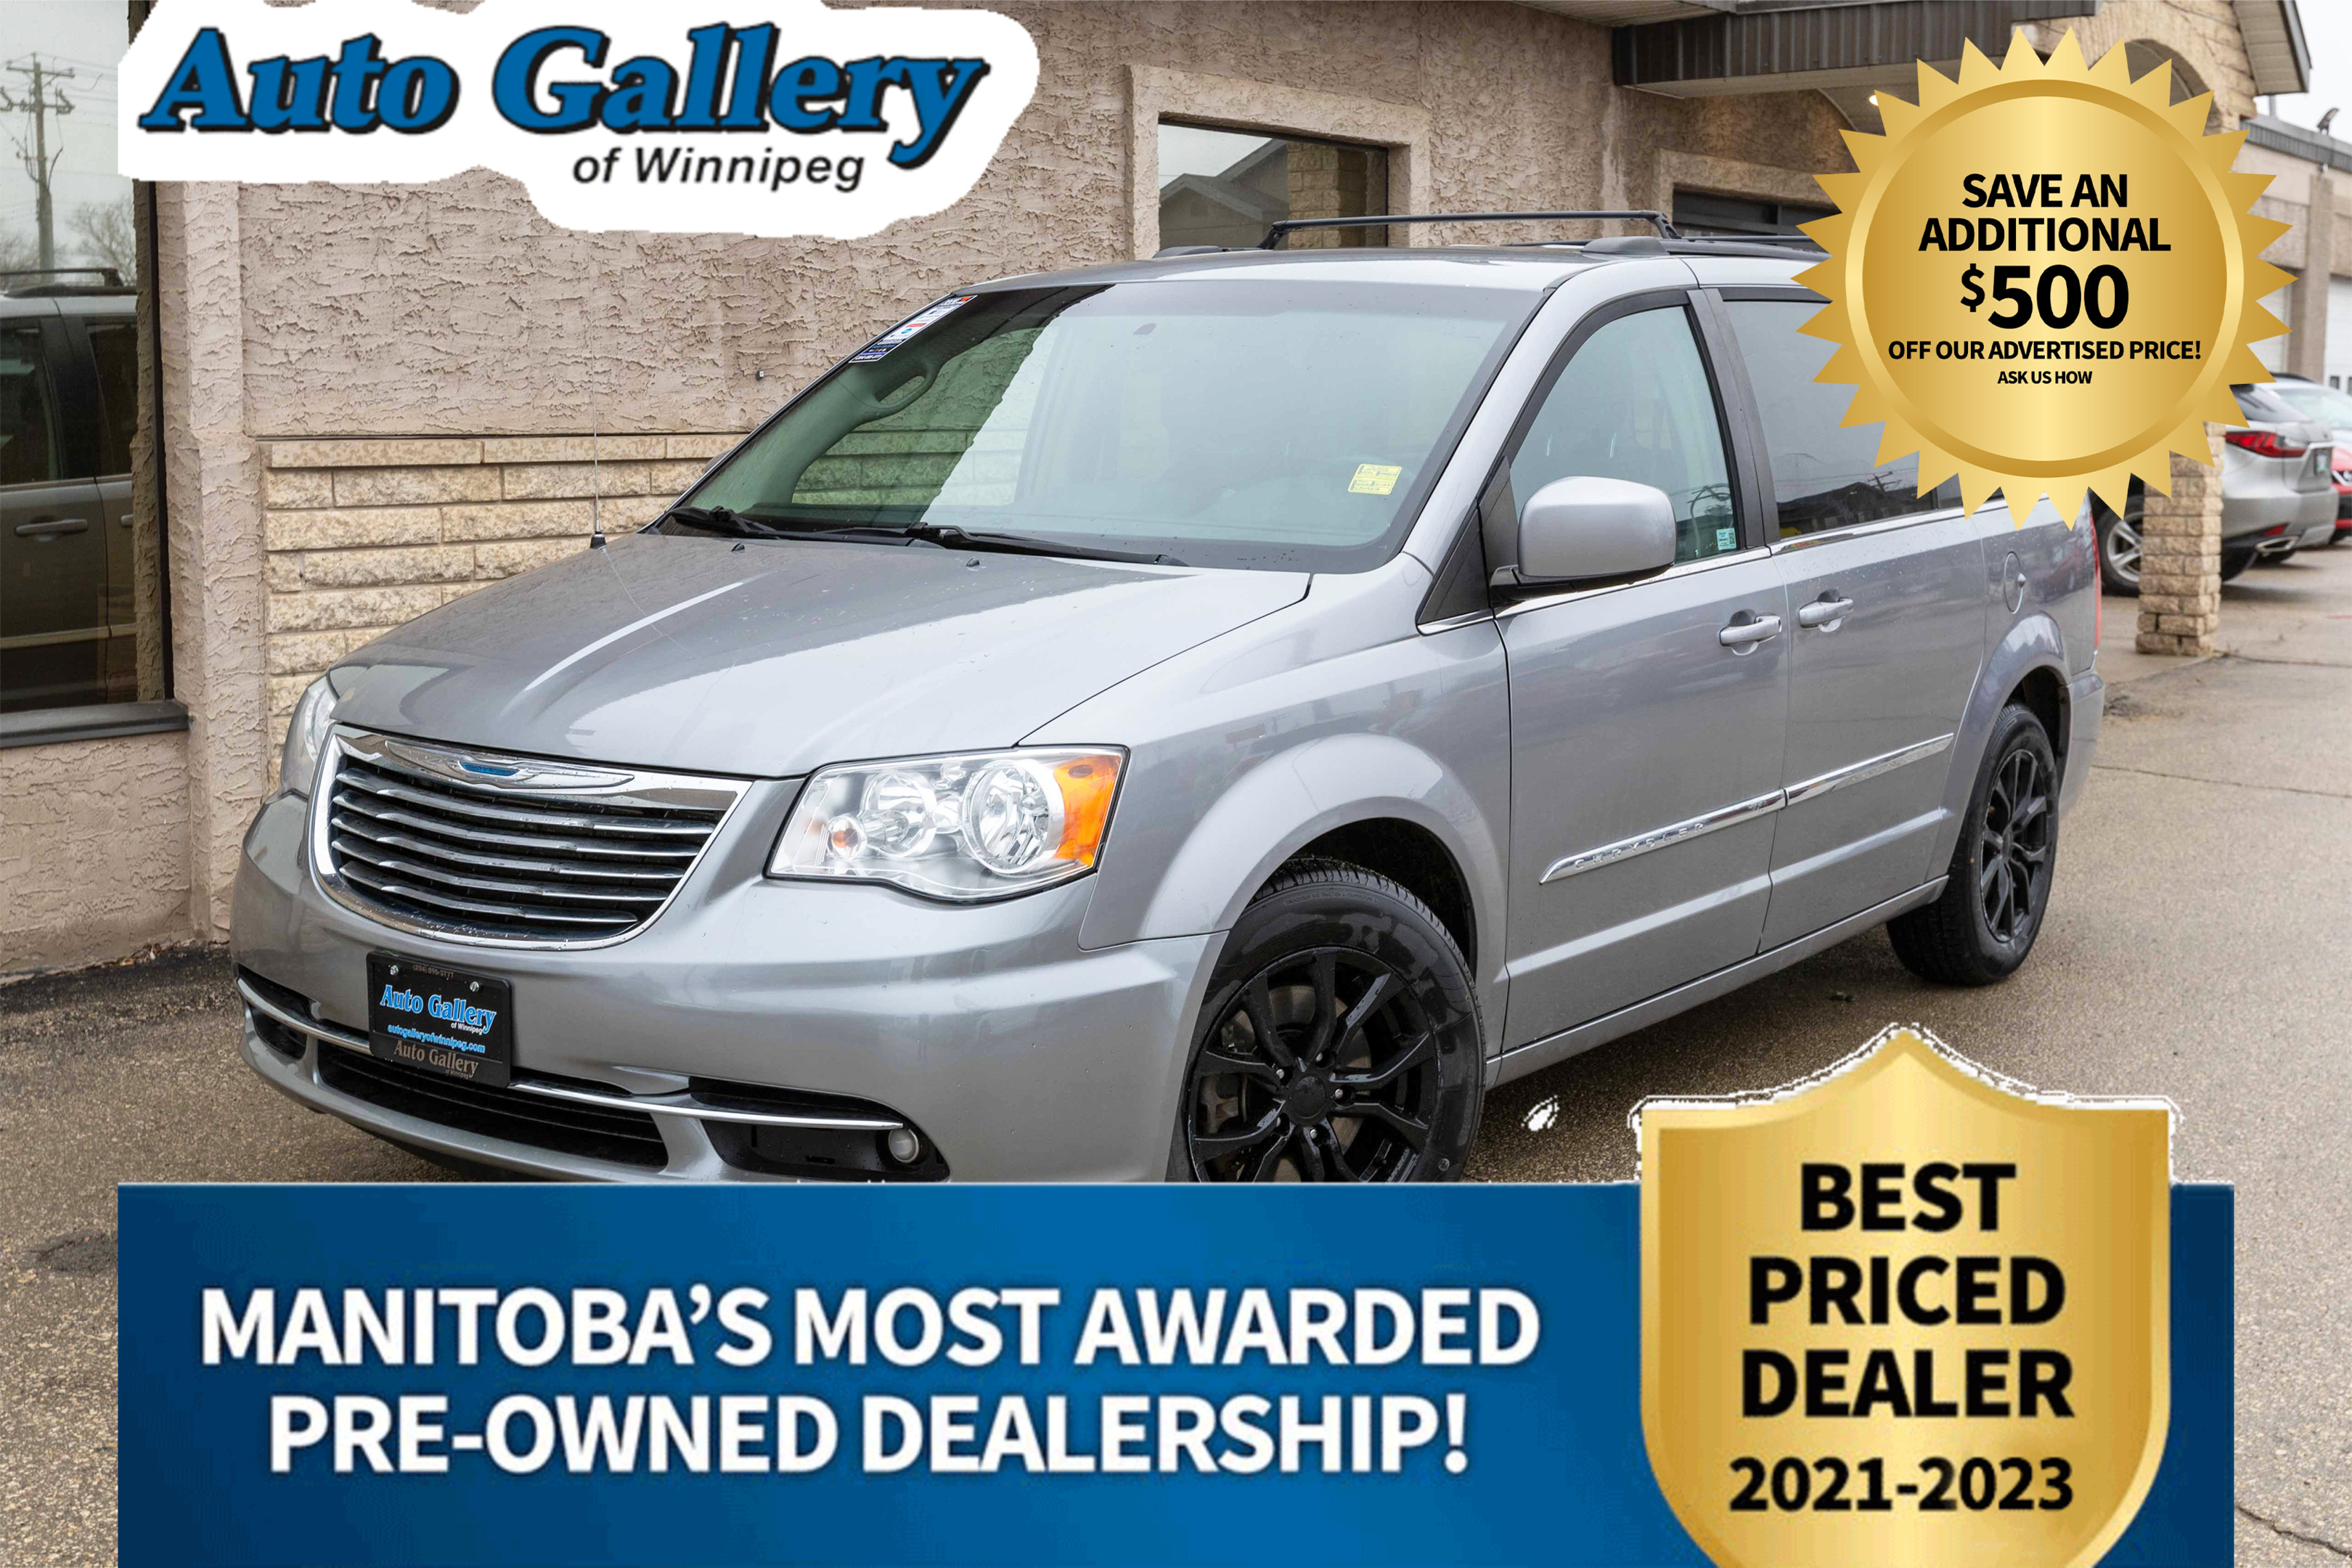 2016 Chrysler Town & Country Touring 7PASSENGER, REVERSE CAMERA, STOW & GO